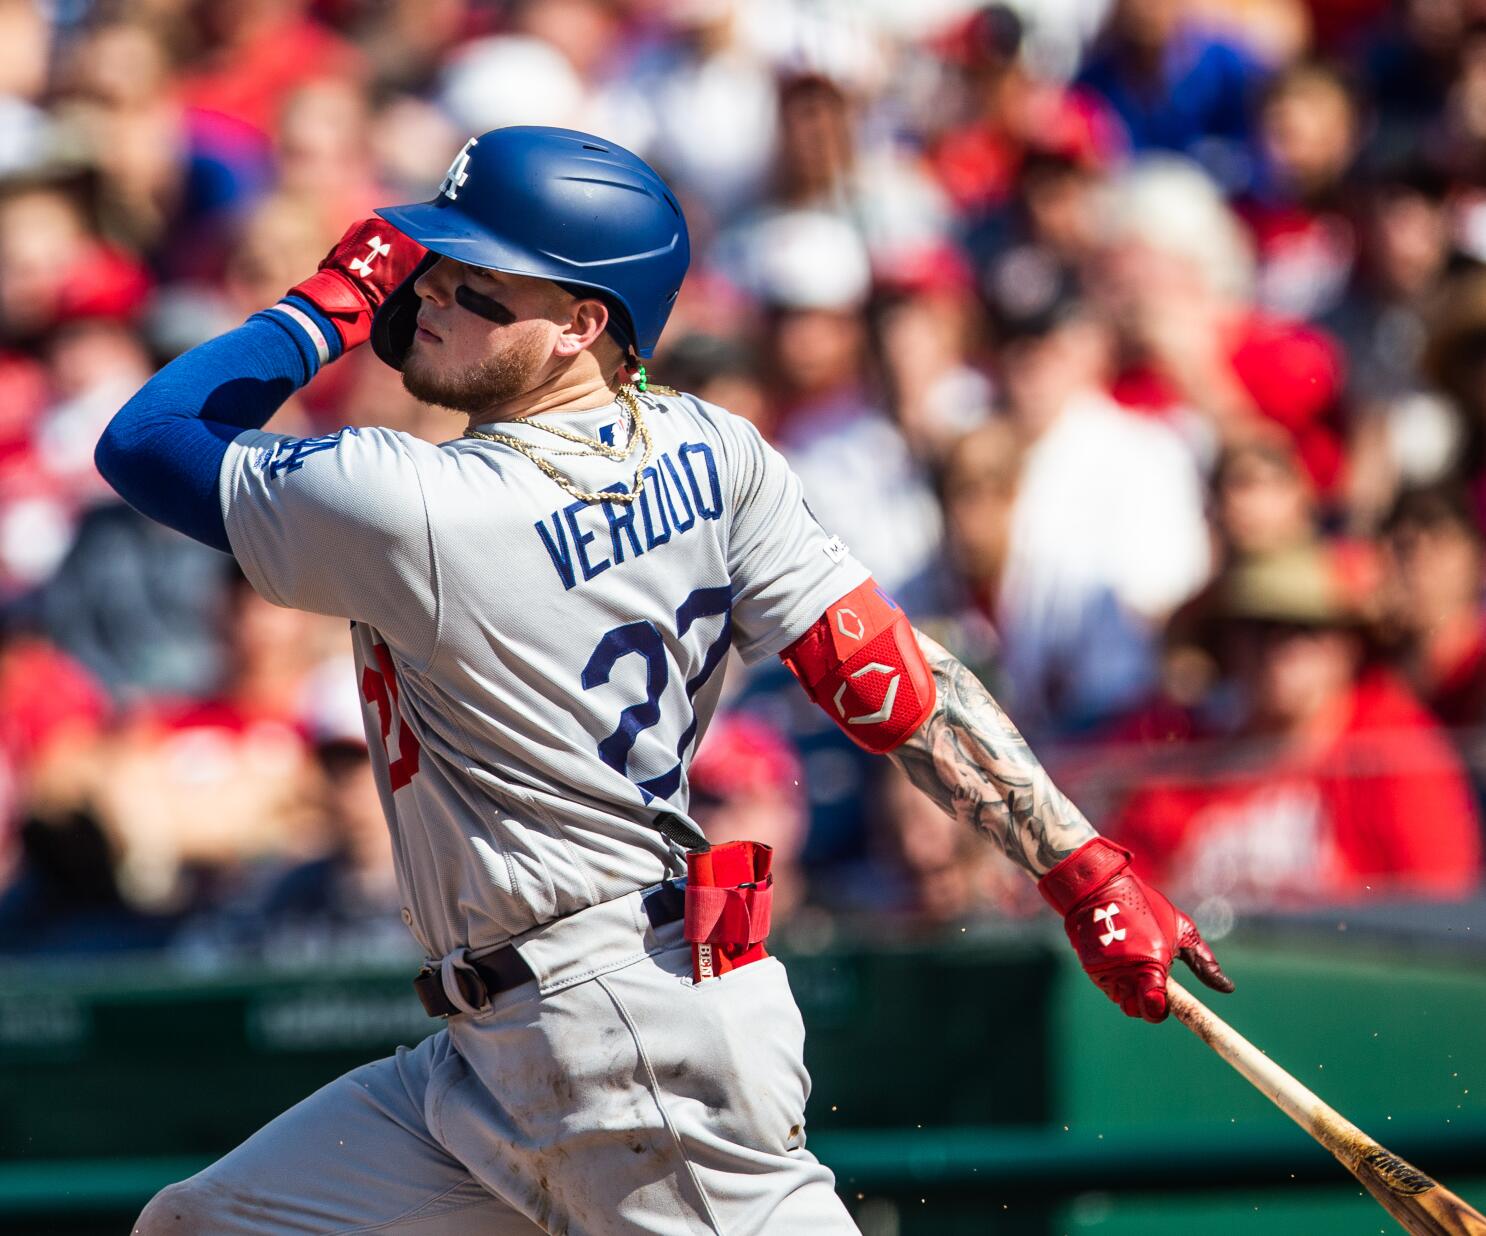 MLB wrap: Who is Alex Verdugo? Remember the name of the Dodgers outfielder